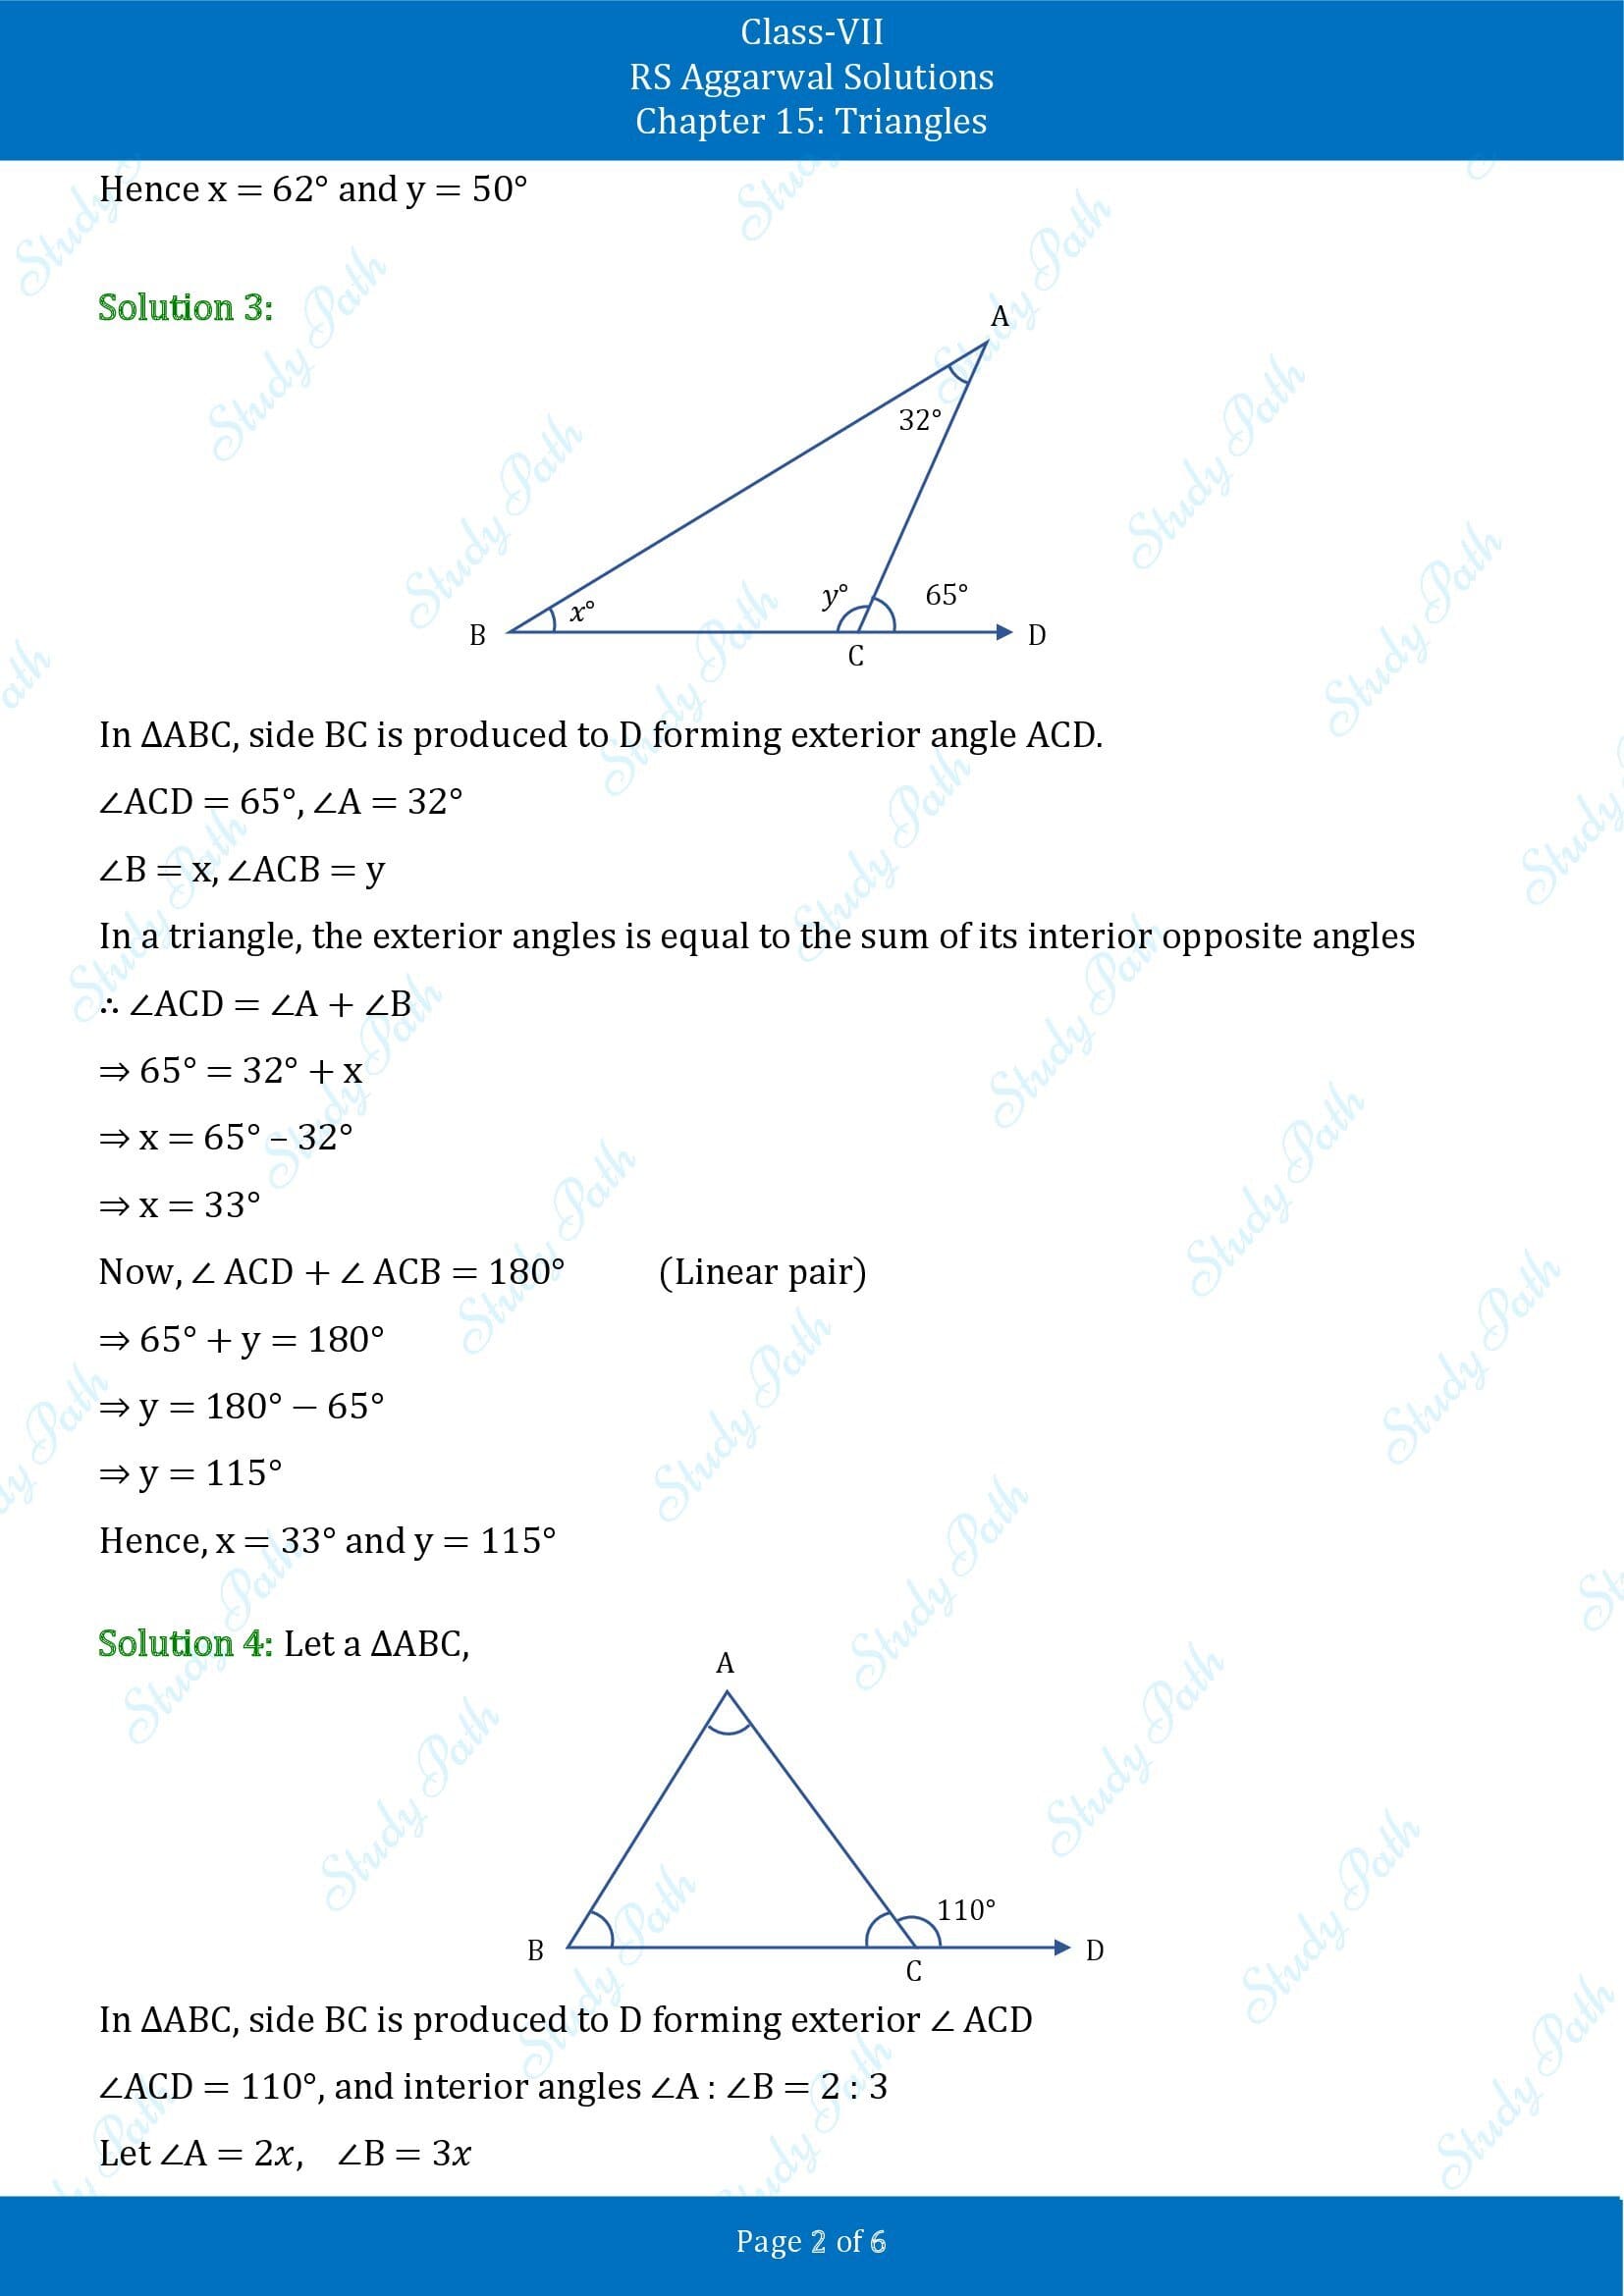 RS Aggarwal Solutions Class 7 Chapter 15 Triangles Exercise 15B 00002